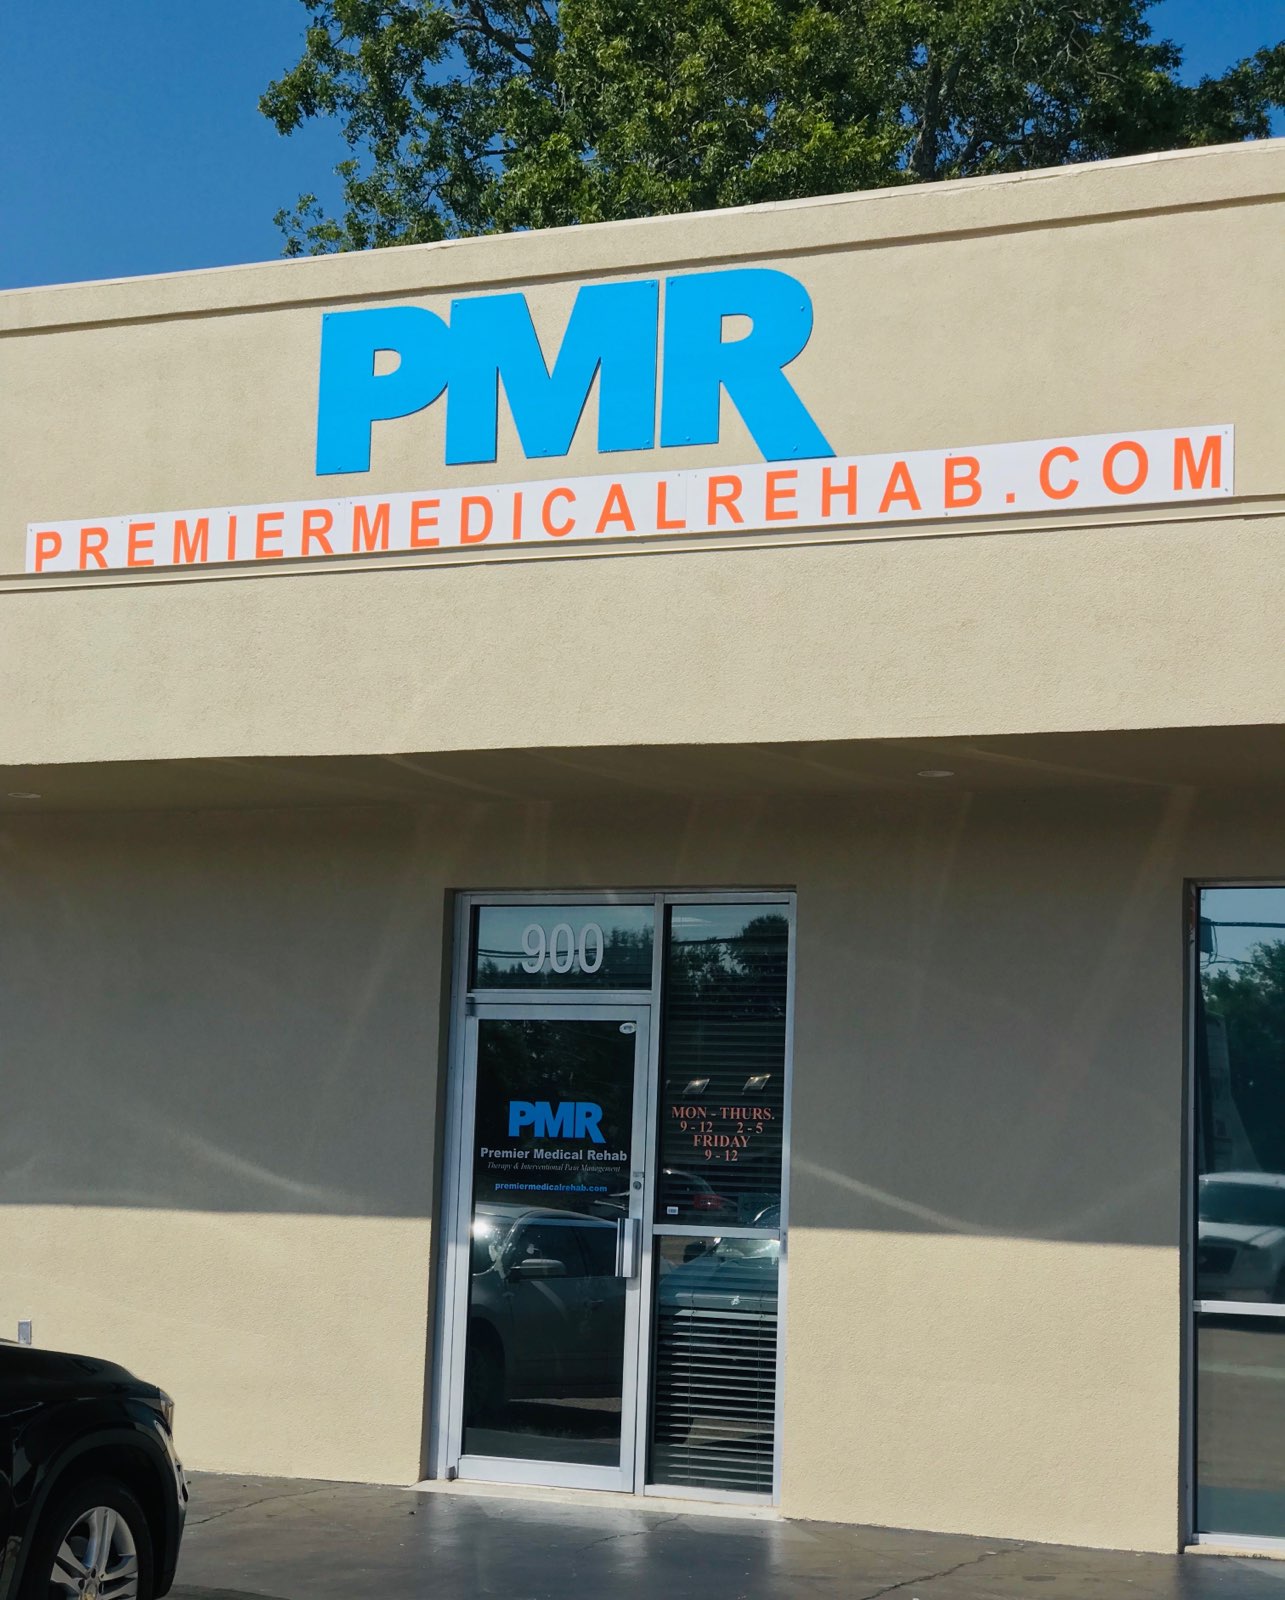 Premier Medical Rehab 1505 W Airline Hwy, Laplace Louisiana 70068